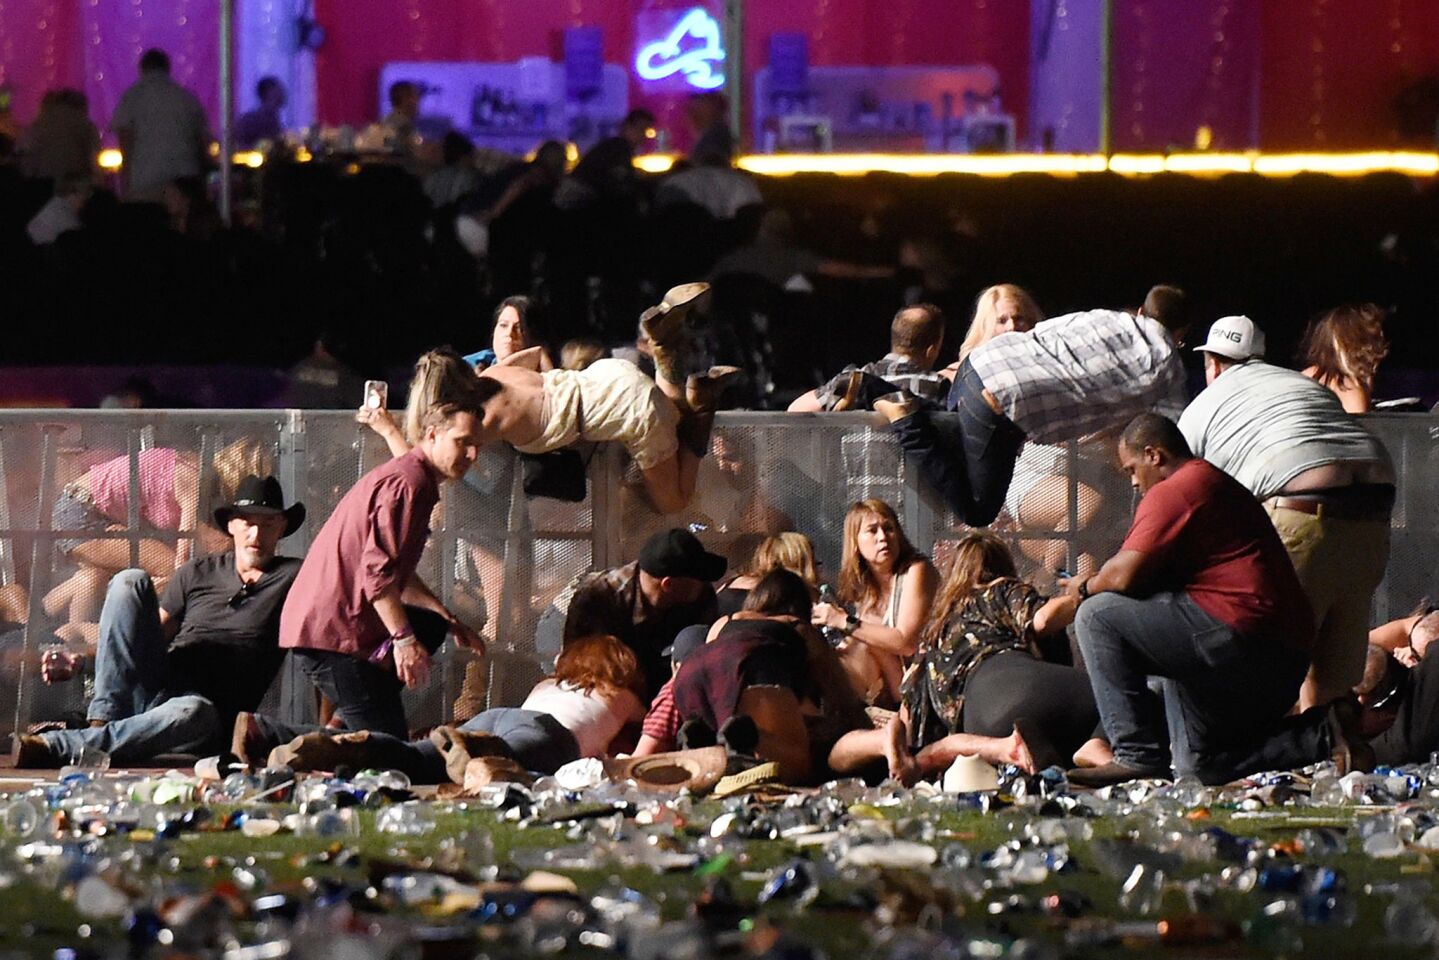 People take cover at the Route 91 Harvest country music festival after hearing gunfire Sunday night in Las Vegas. The shooter was firing from the nearby Mandalay Bay Resort and Casino.